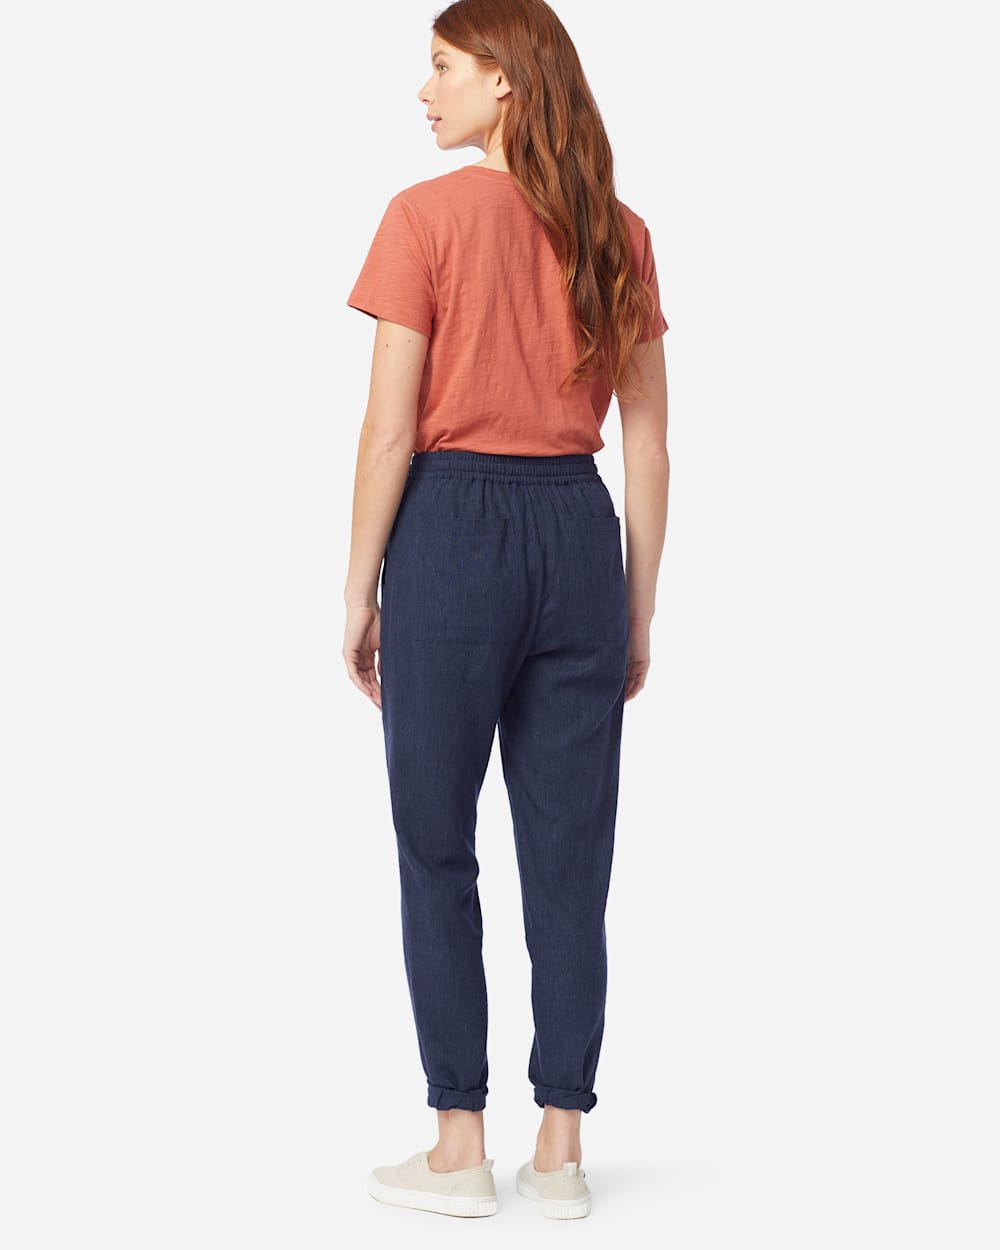 ALTERNATE VIEW OF WOMEN'S WASHED LINEN PANTS IN NAVY MIX image number 2